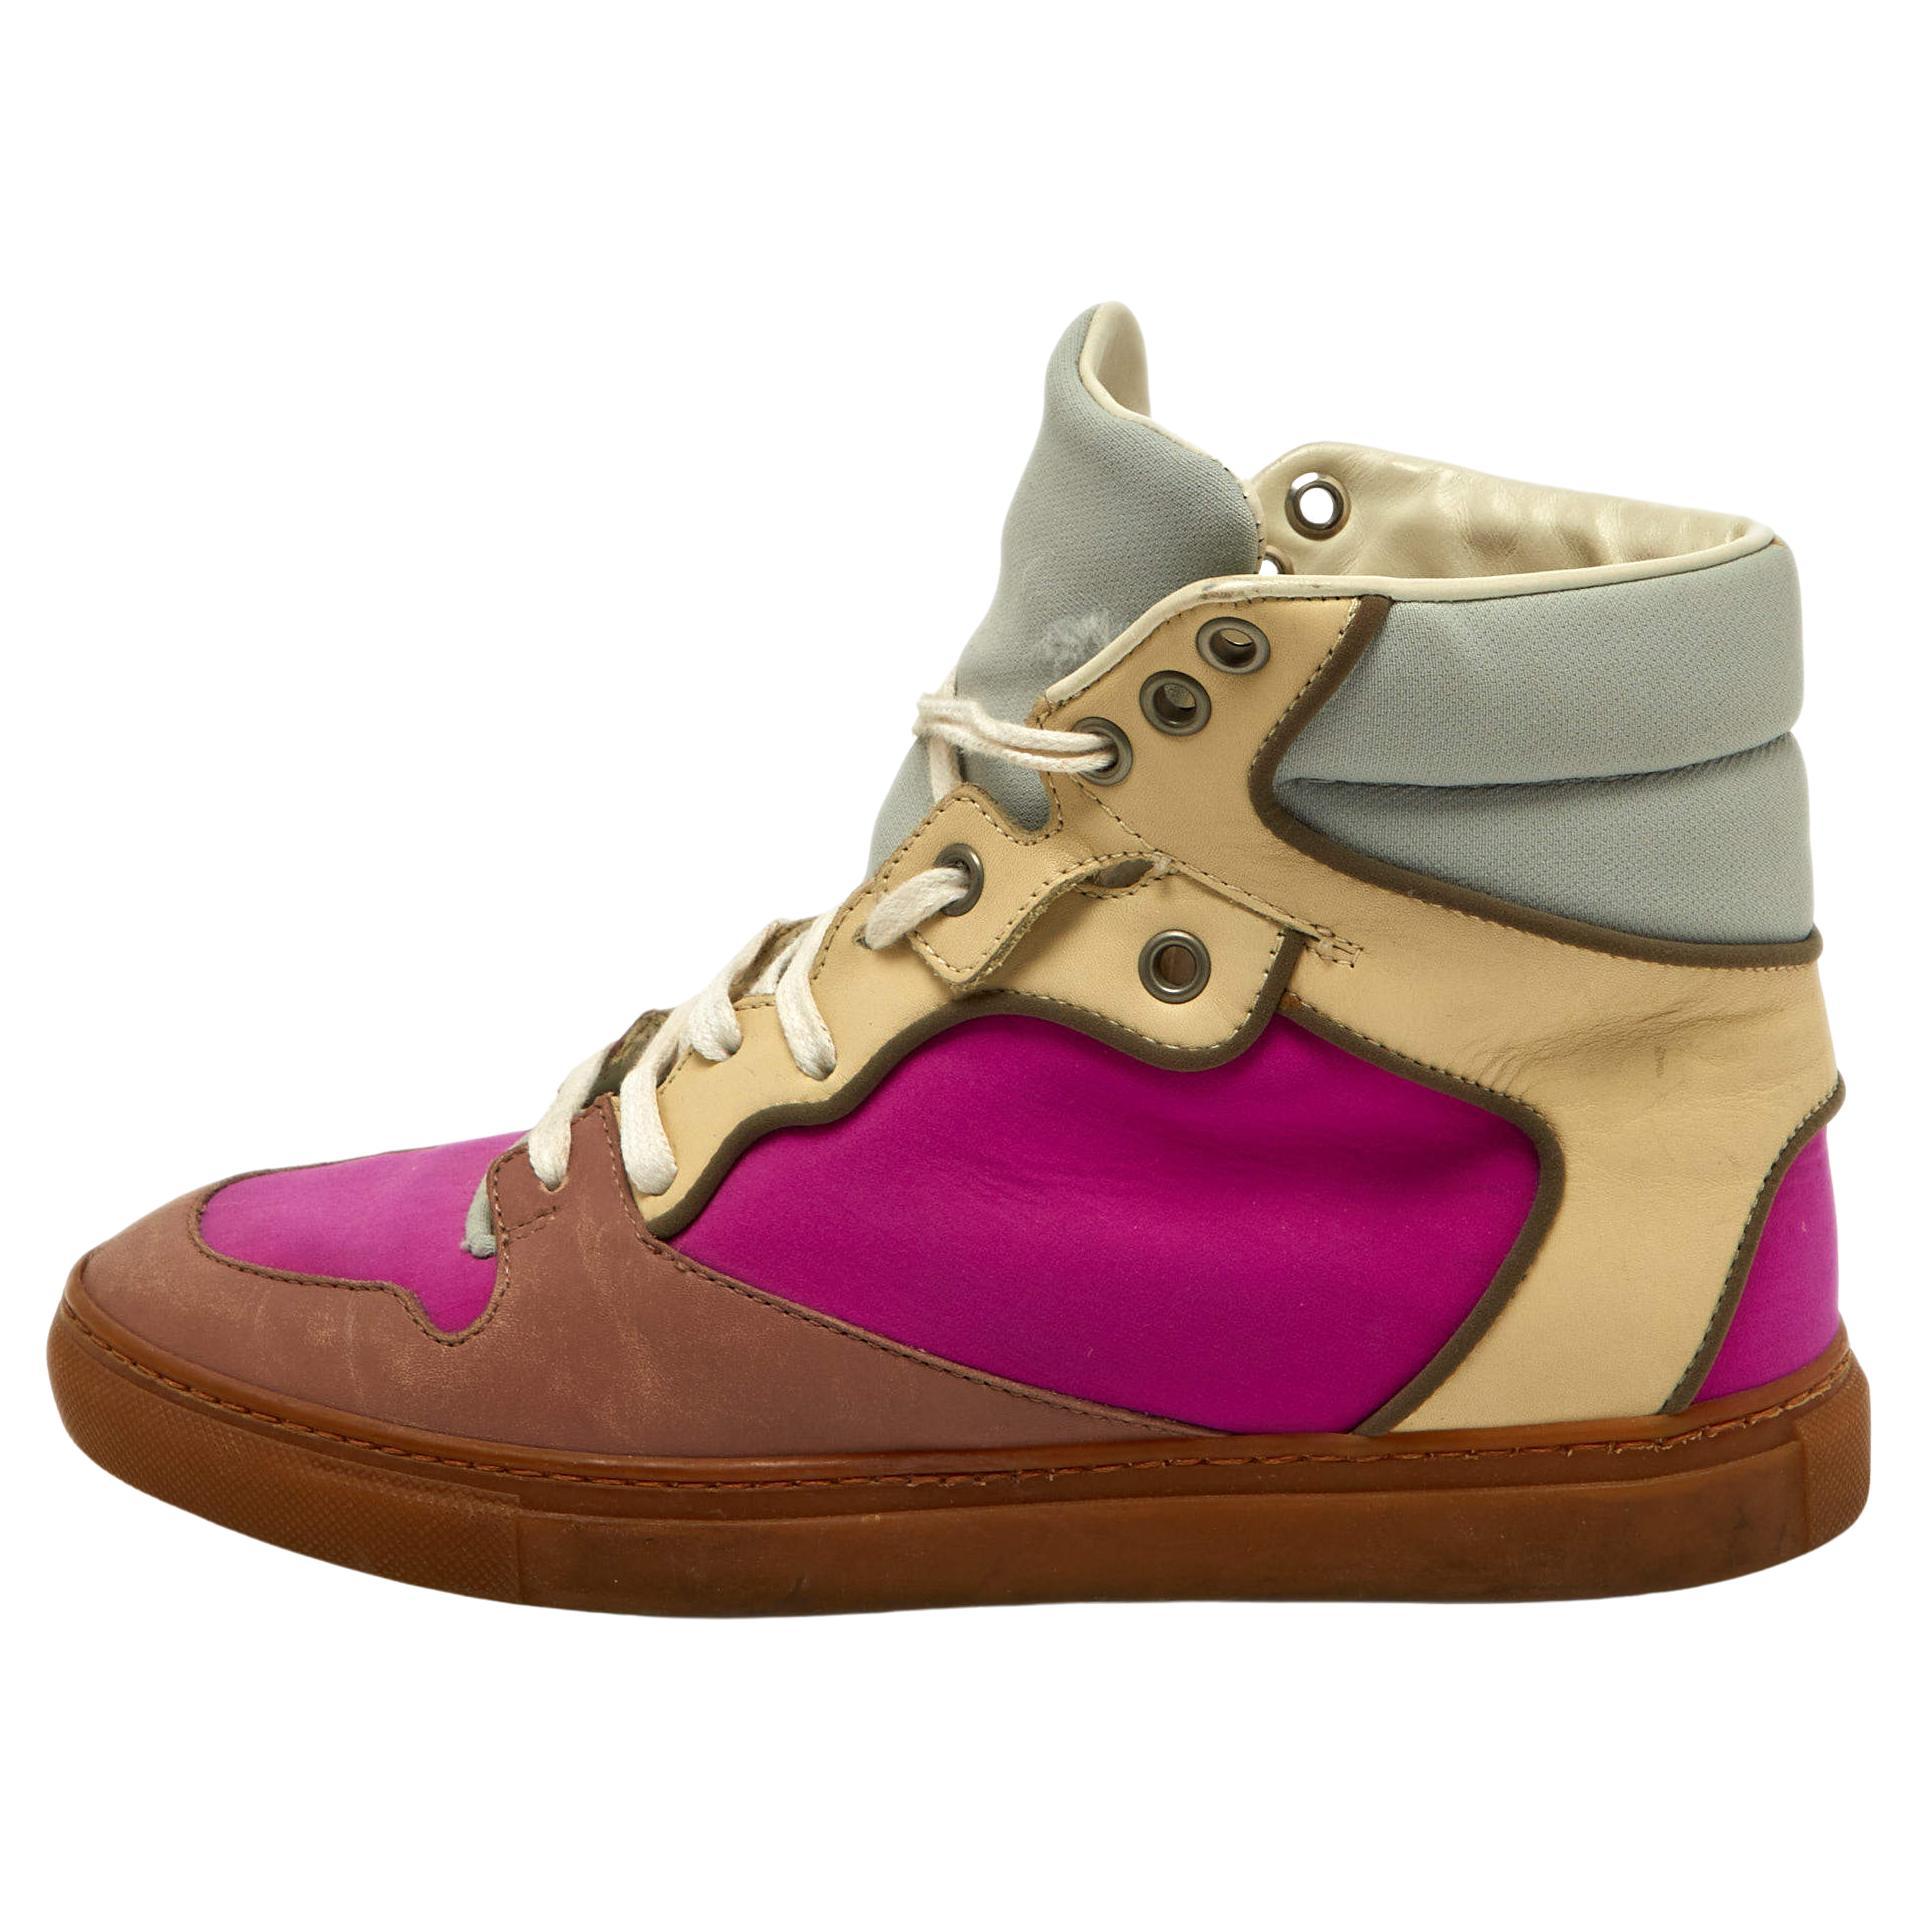 Balenciaga Multicolor Leather And Fabric High Top Sneakers Size 37 For Sale